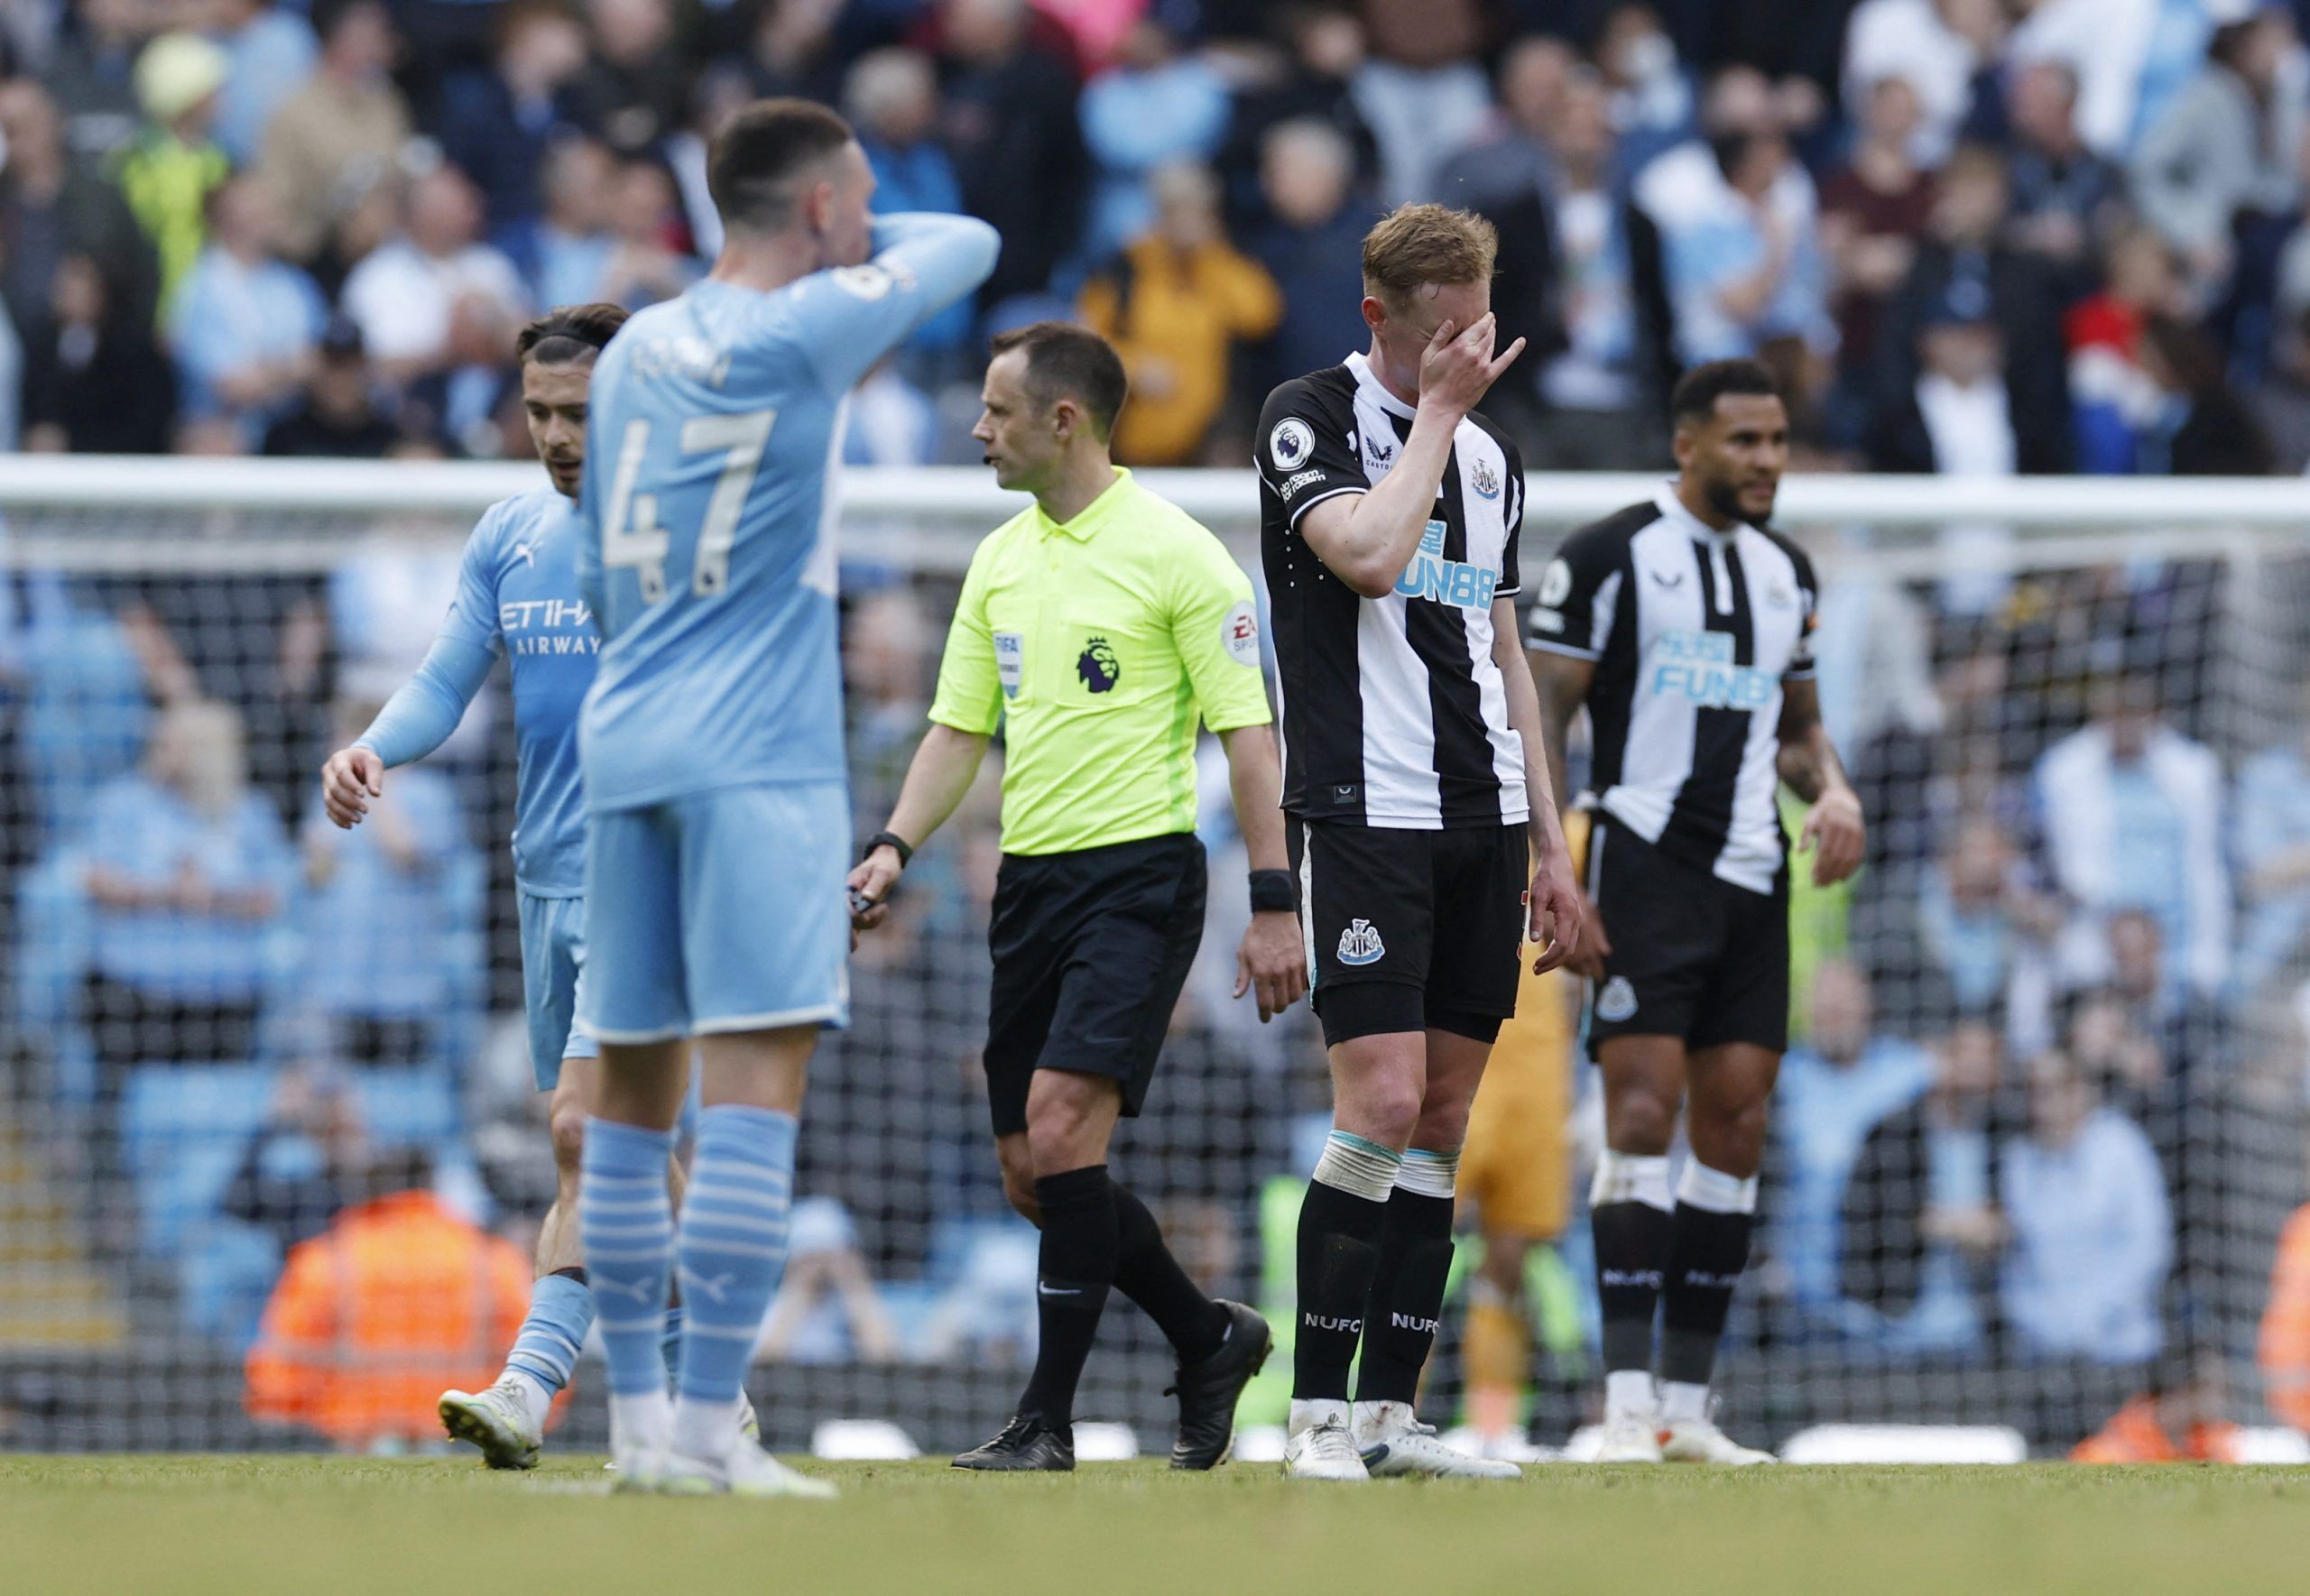 Soccer Football - Premier League - Manchester City v Newcastle United - Etihad Stadium, Manchester, Britain - May 8, 2022 Newcastle United's Sean Longstaff looks dejected after Manchester City's Phil Foden scores their fourth goal Action Images via Reuters/Jason Cairnduff EDITORIAL USE ONLY. No use with unauthorized audio, video, data, fixture lists, club/league logos or 'live' services. Online in-match use limited to 75 images, no video emulation. No use in betting, games or single club /league